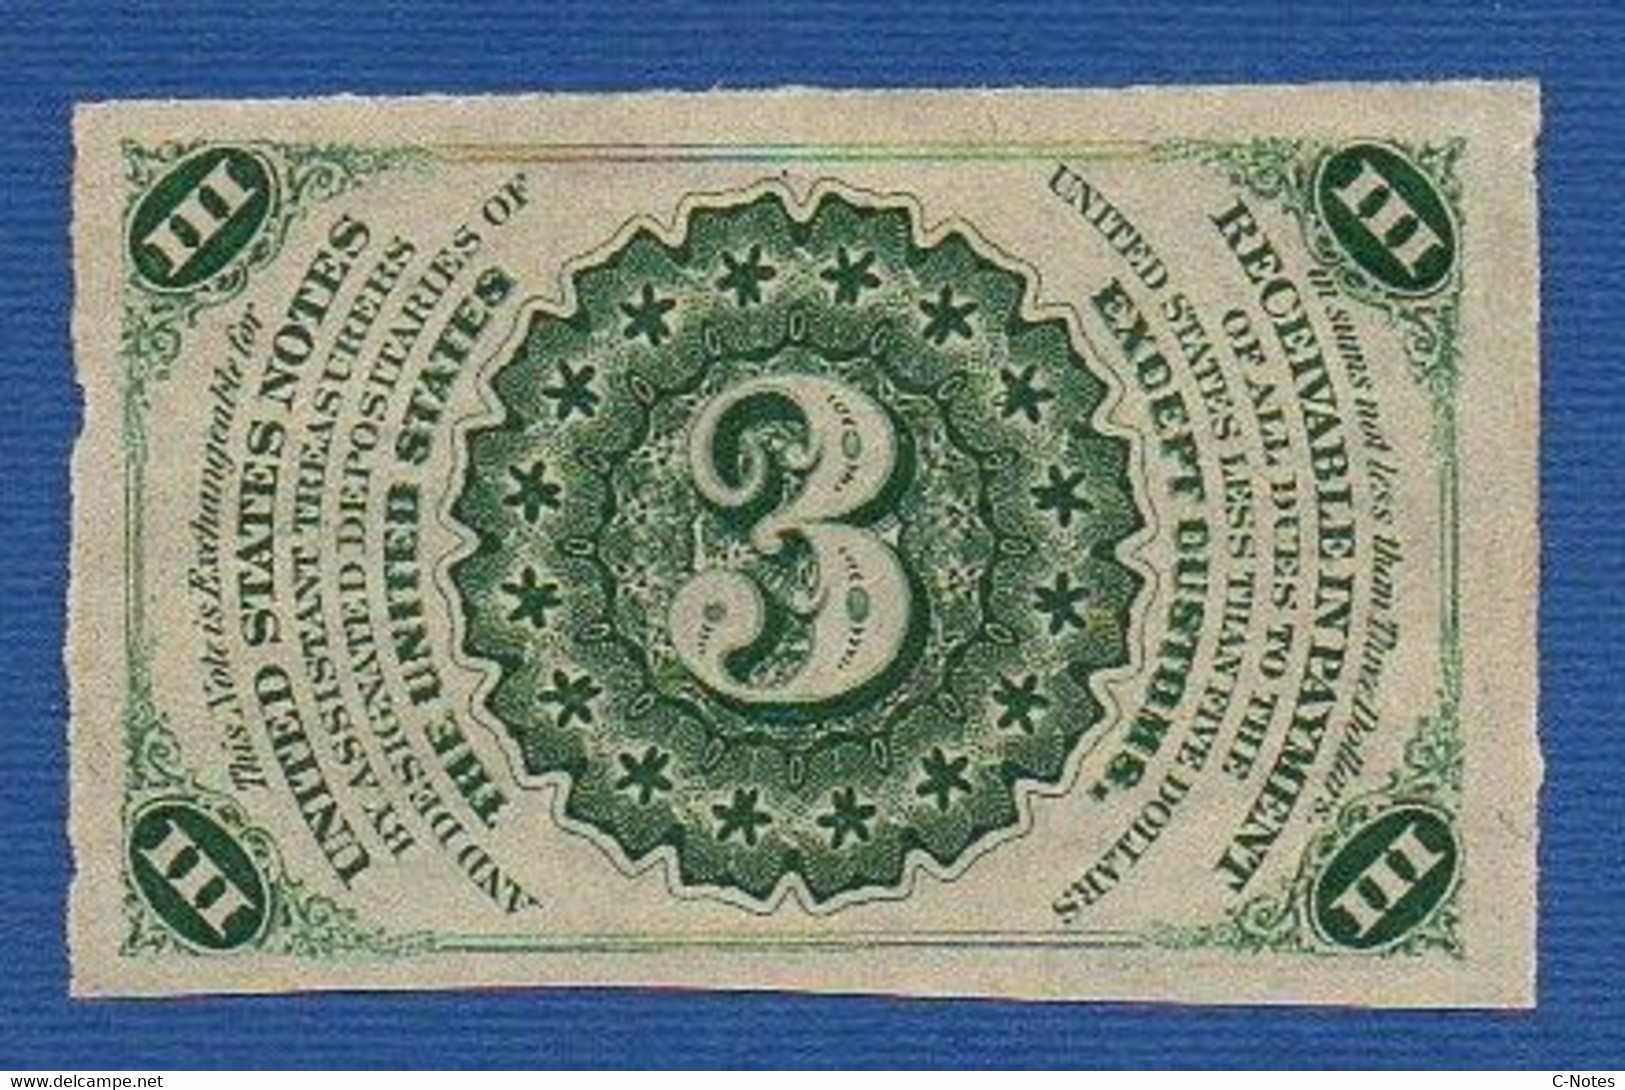 UNITED STATES OF AMERICA - P.105a – 3 Cents 1863 AUNC, No Serial Number - 1863 : 3° Emission